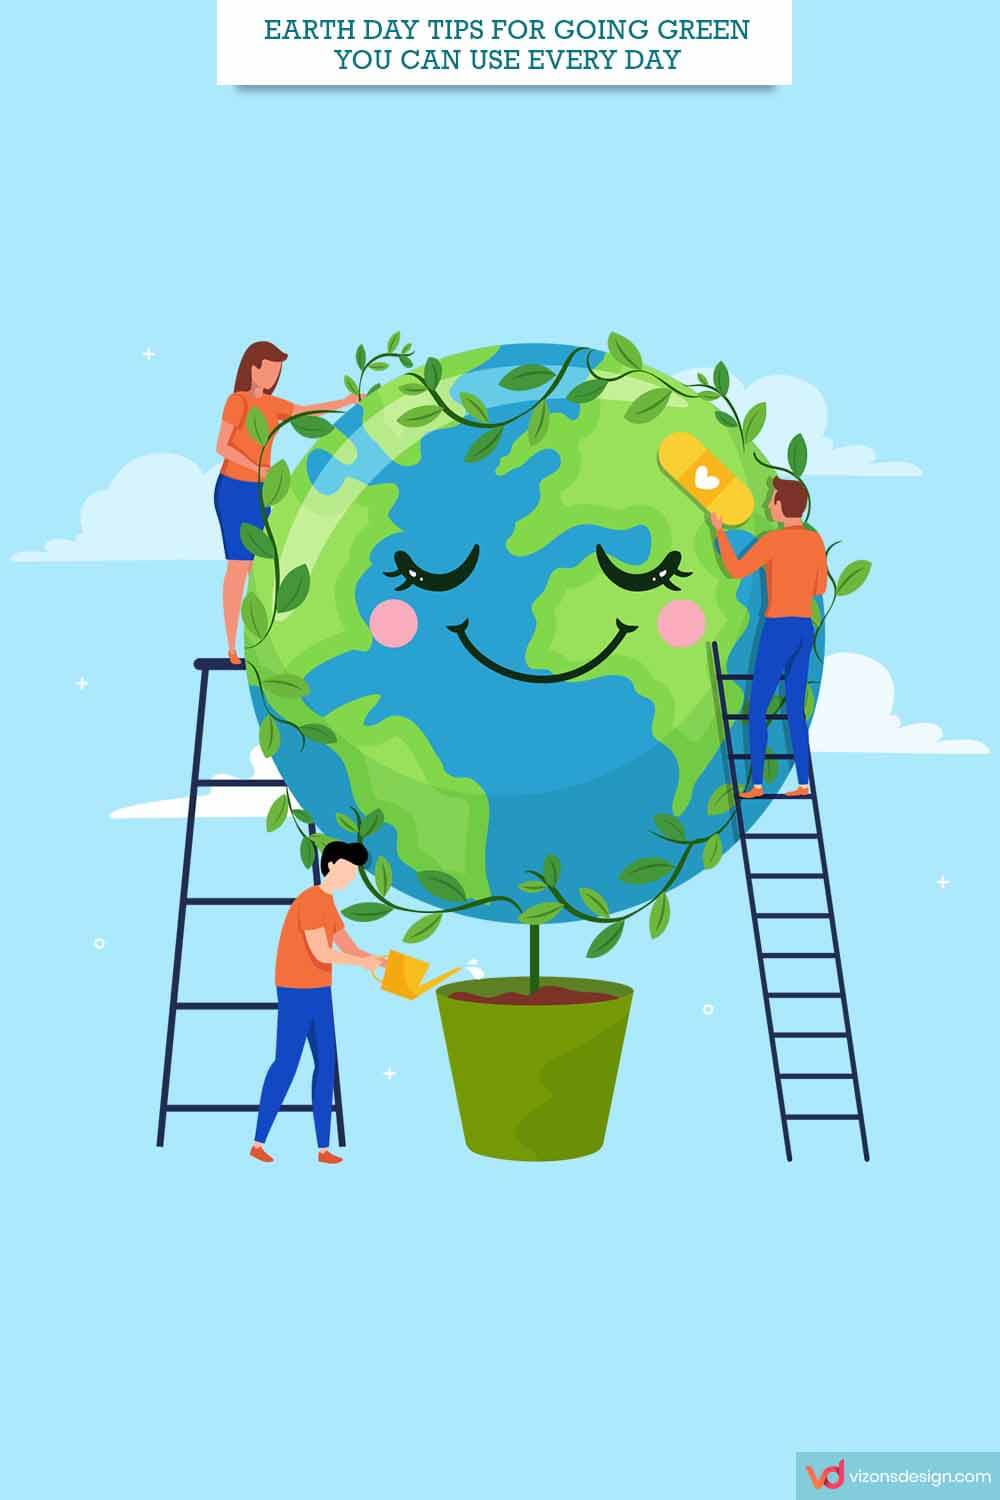 Earth Day Tips For Going Green You Can Use Every Day